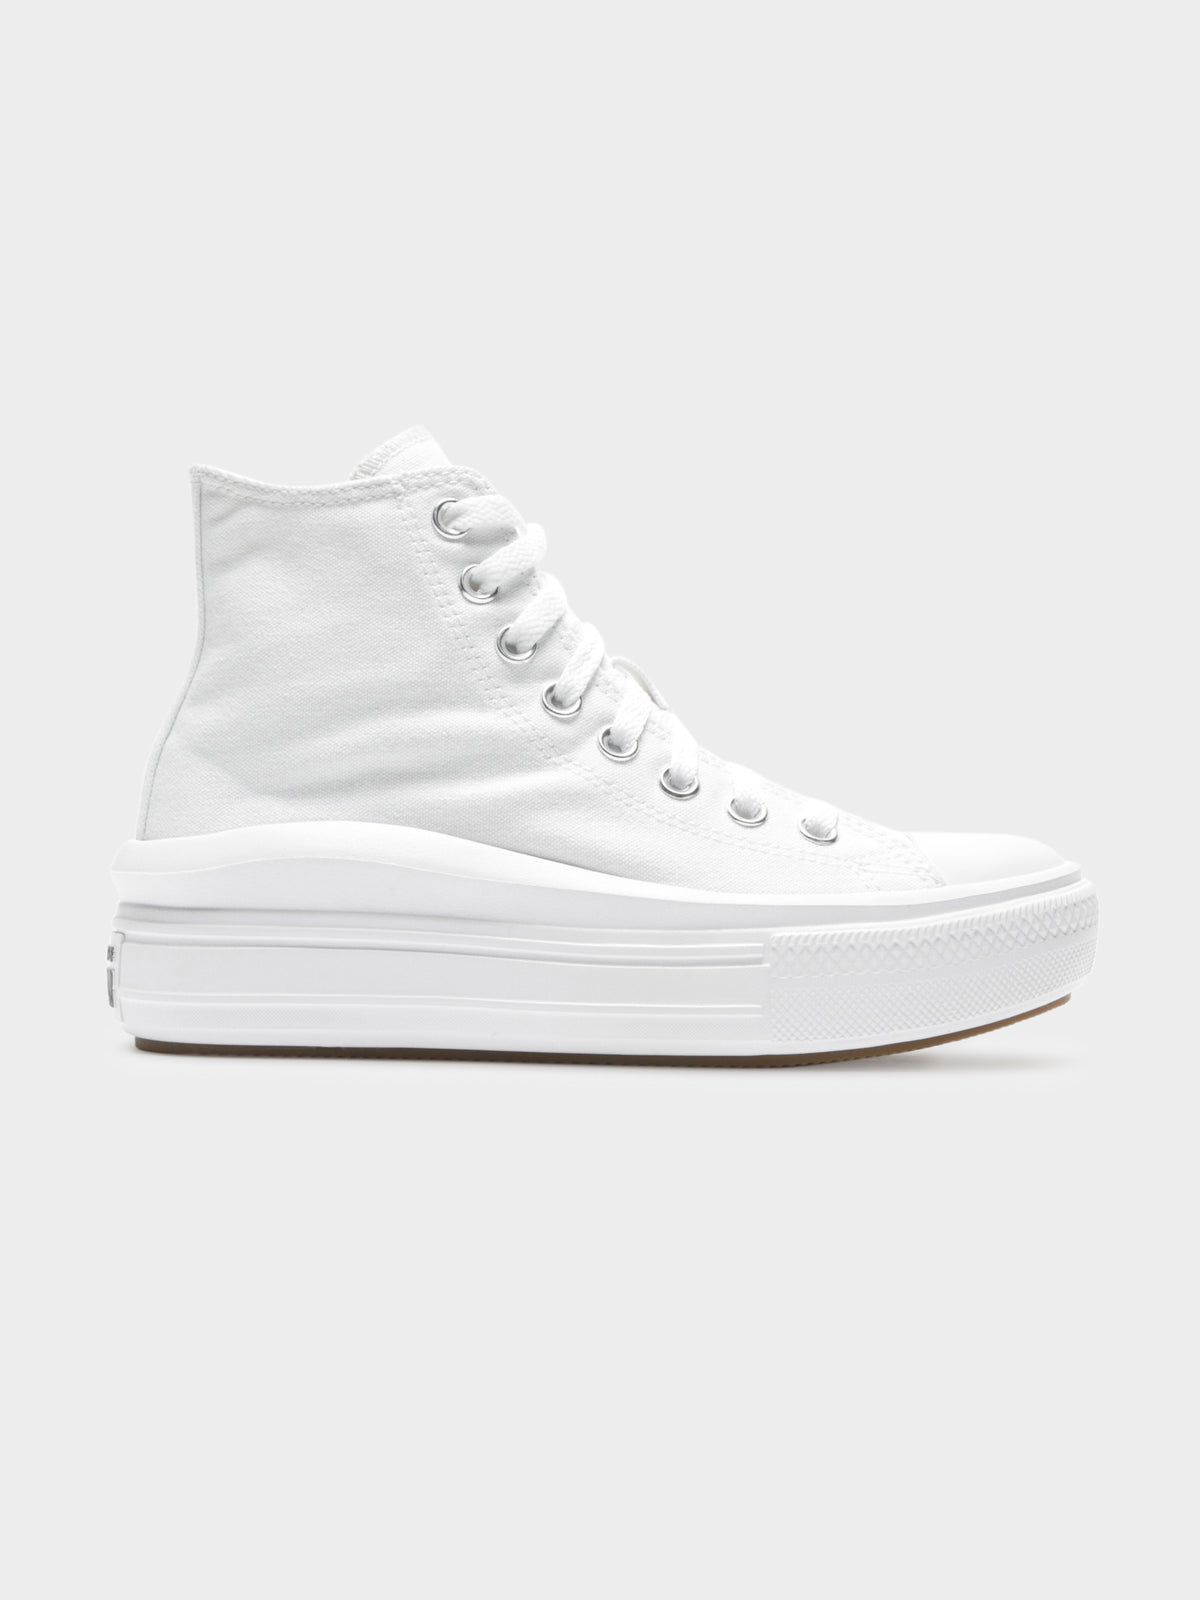 Womens Chuck Taylor Move Platform High Top Sneakers in All White